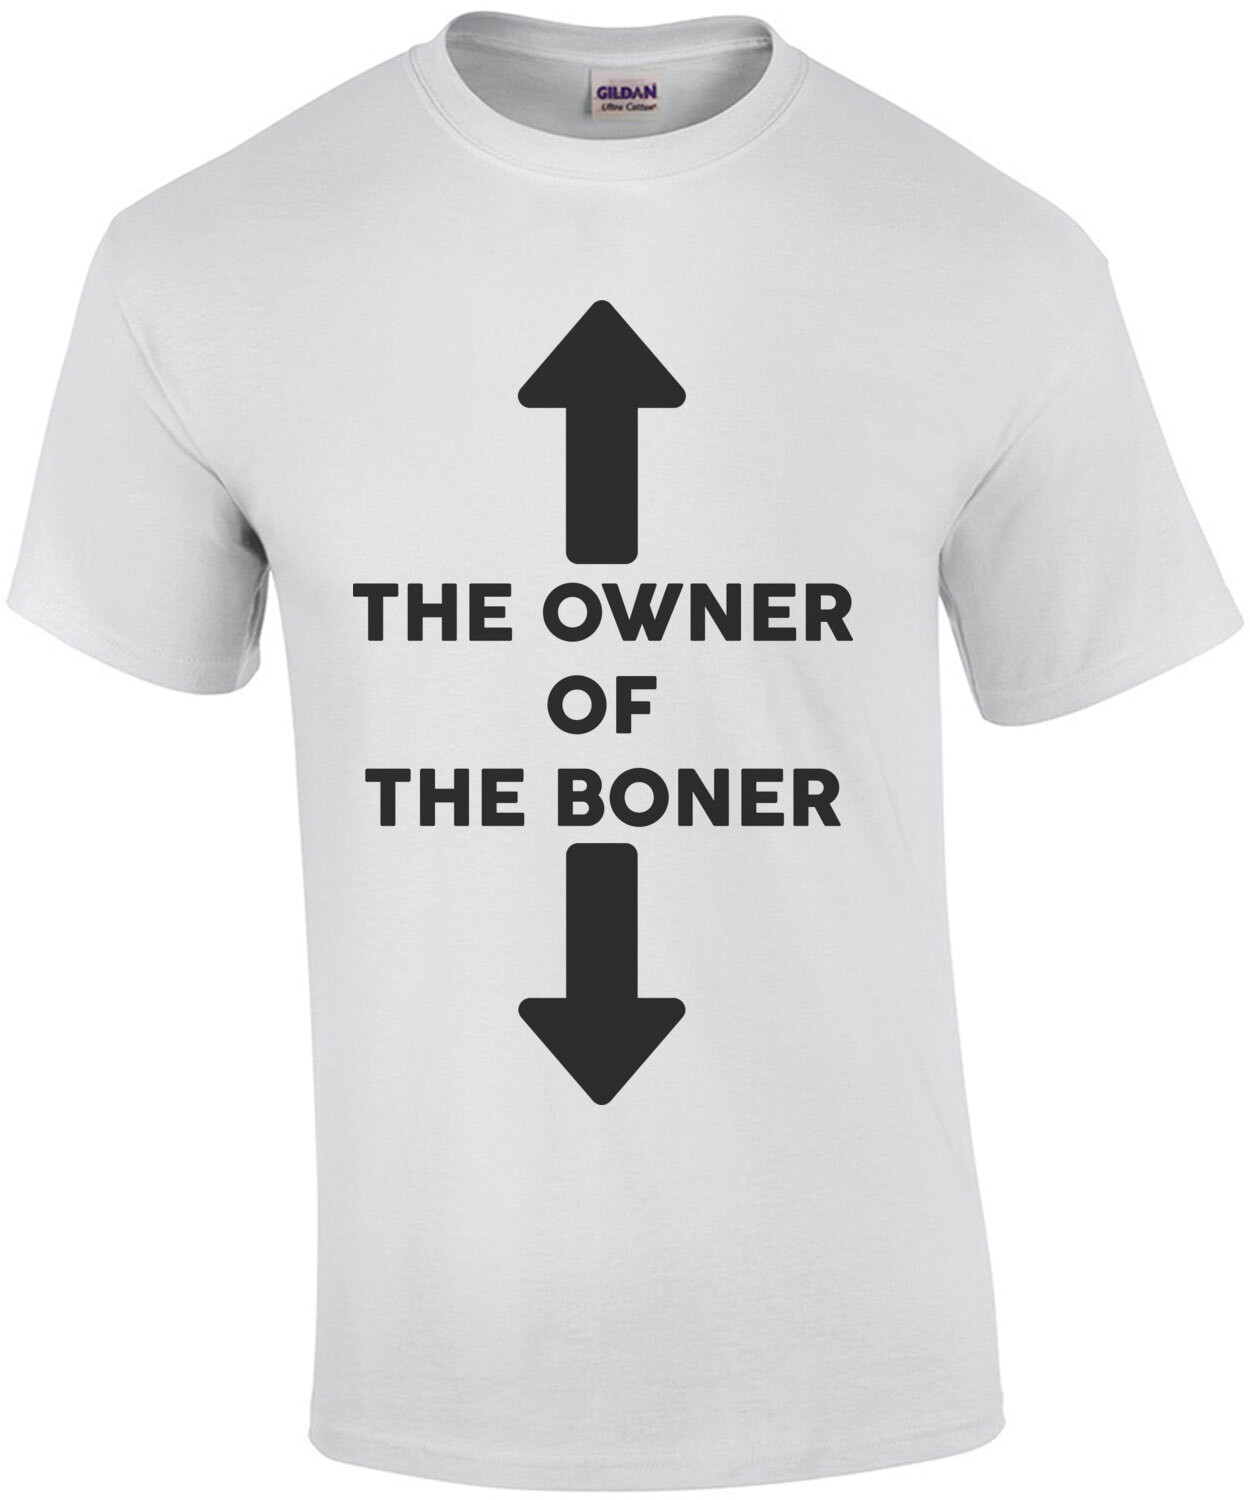 The Owner of the Boner Offensive Tee